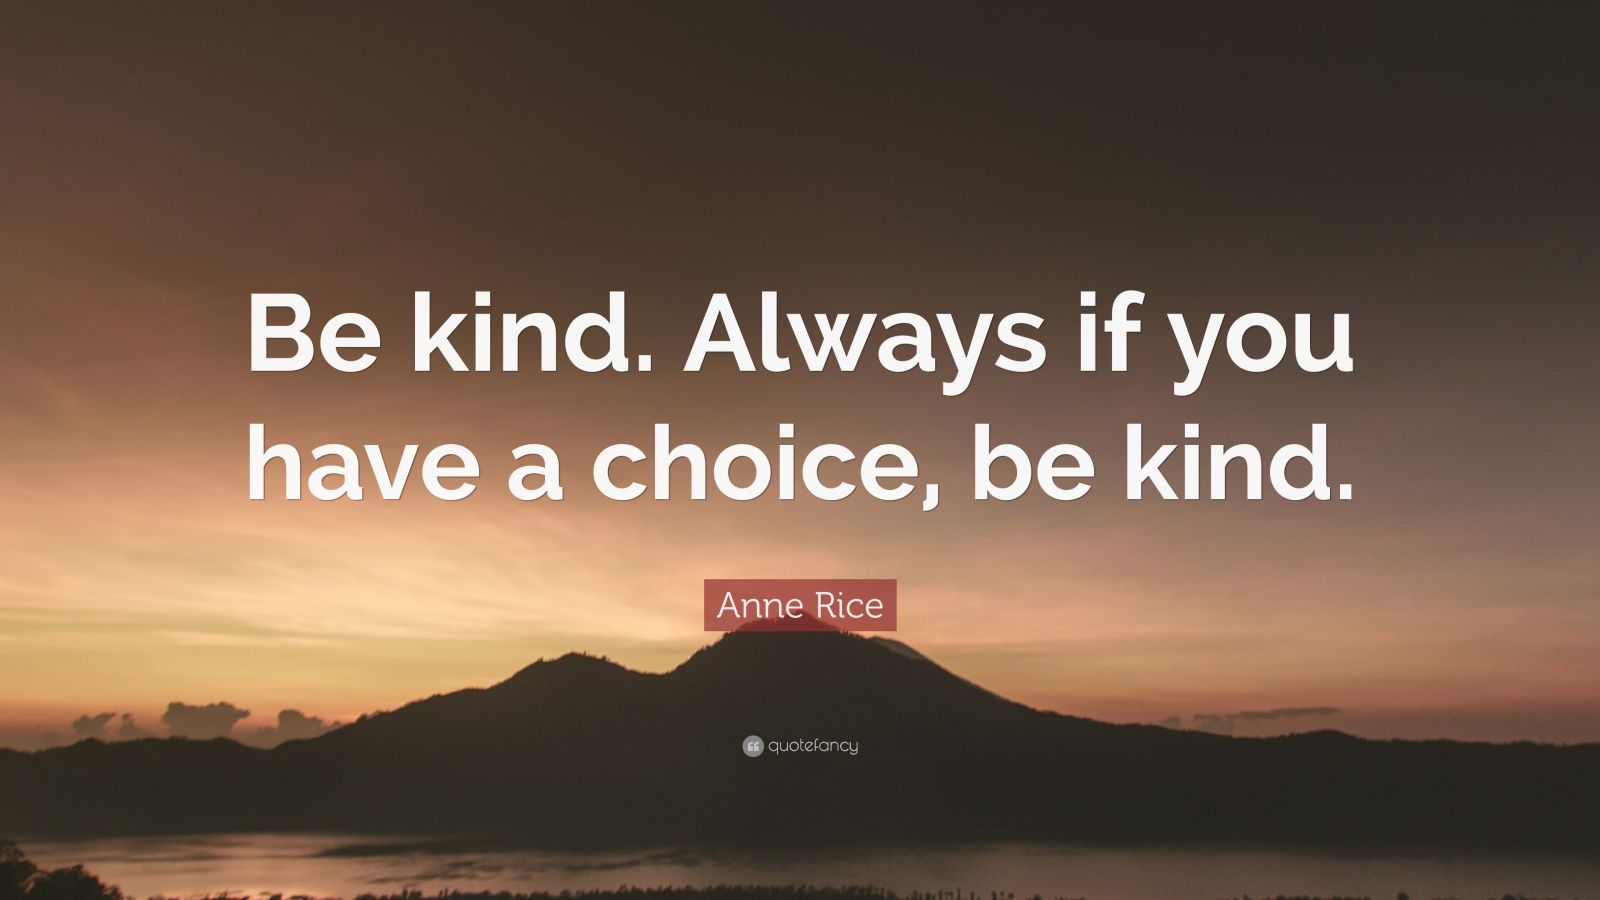 Anne Rice Quote: “Be kind. Always if you have a choice, be kind.” (7 ...